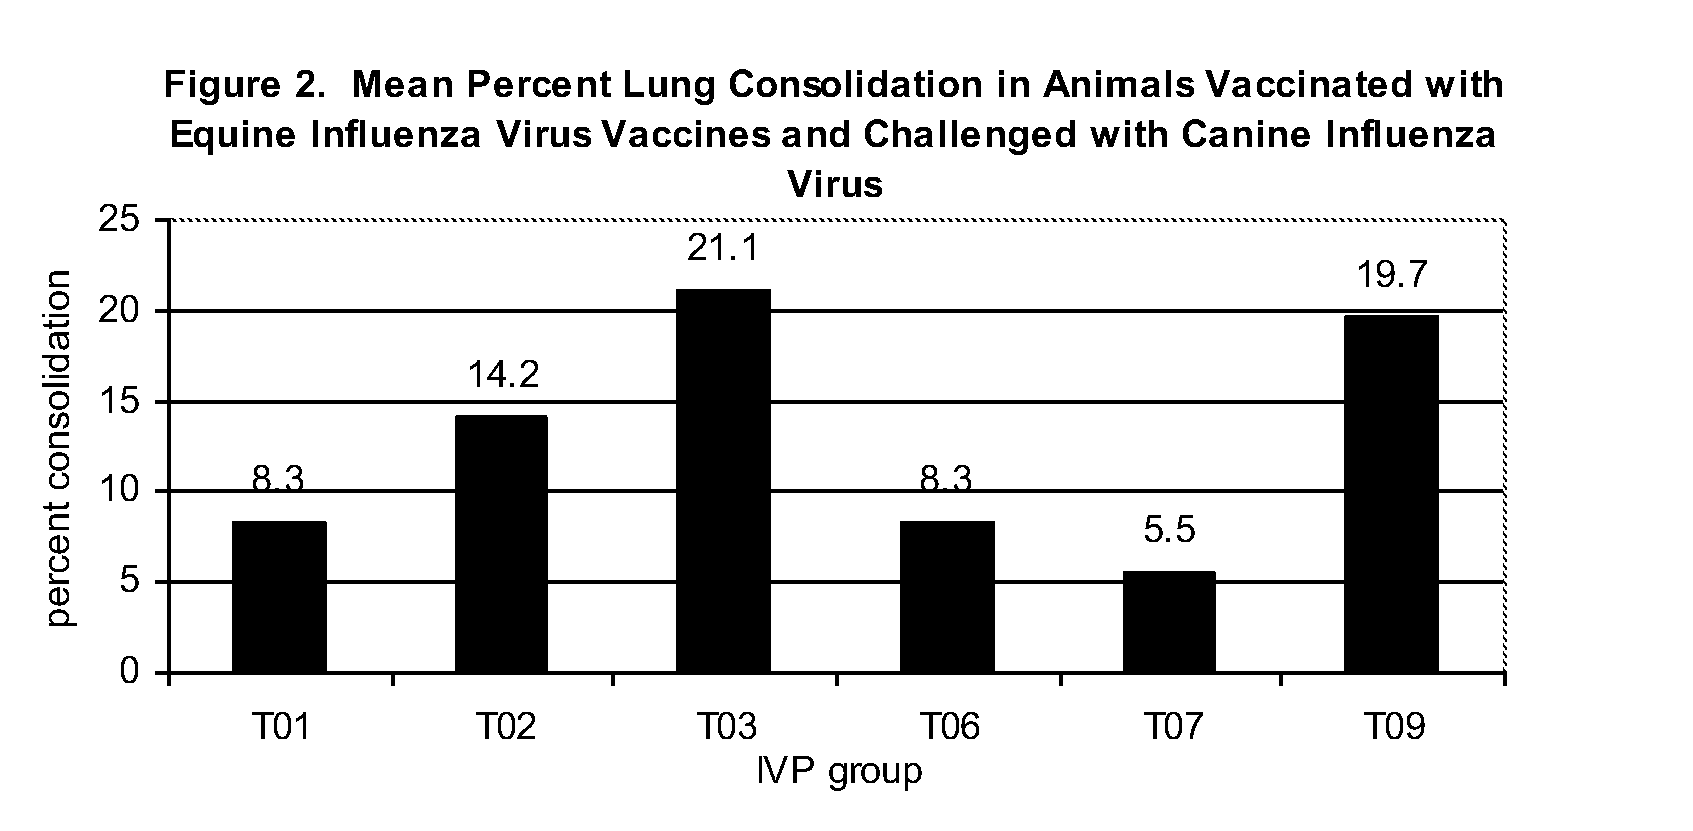 Vaccines and Methods to Treat Canine influenza